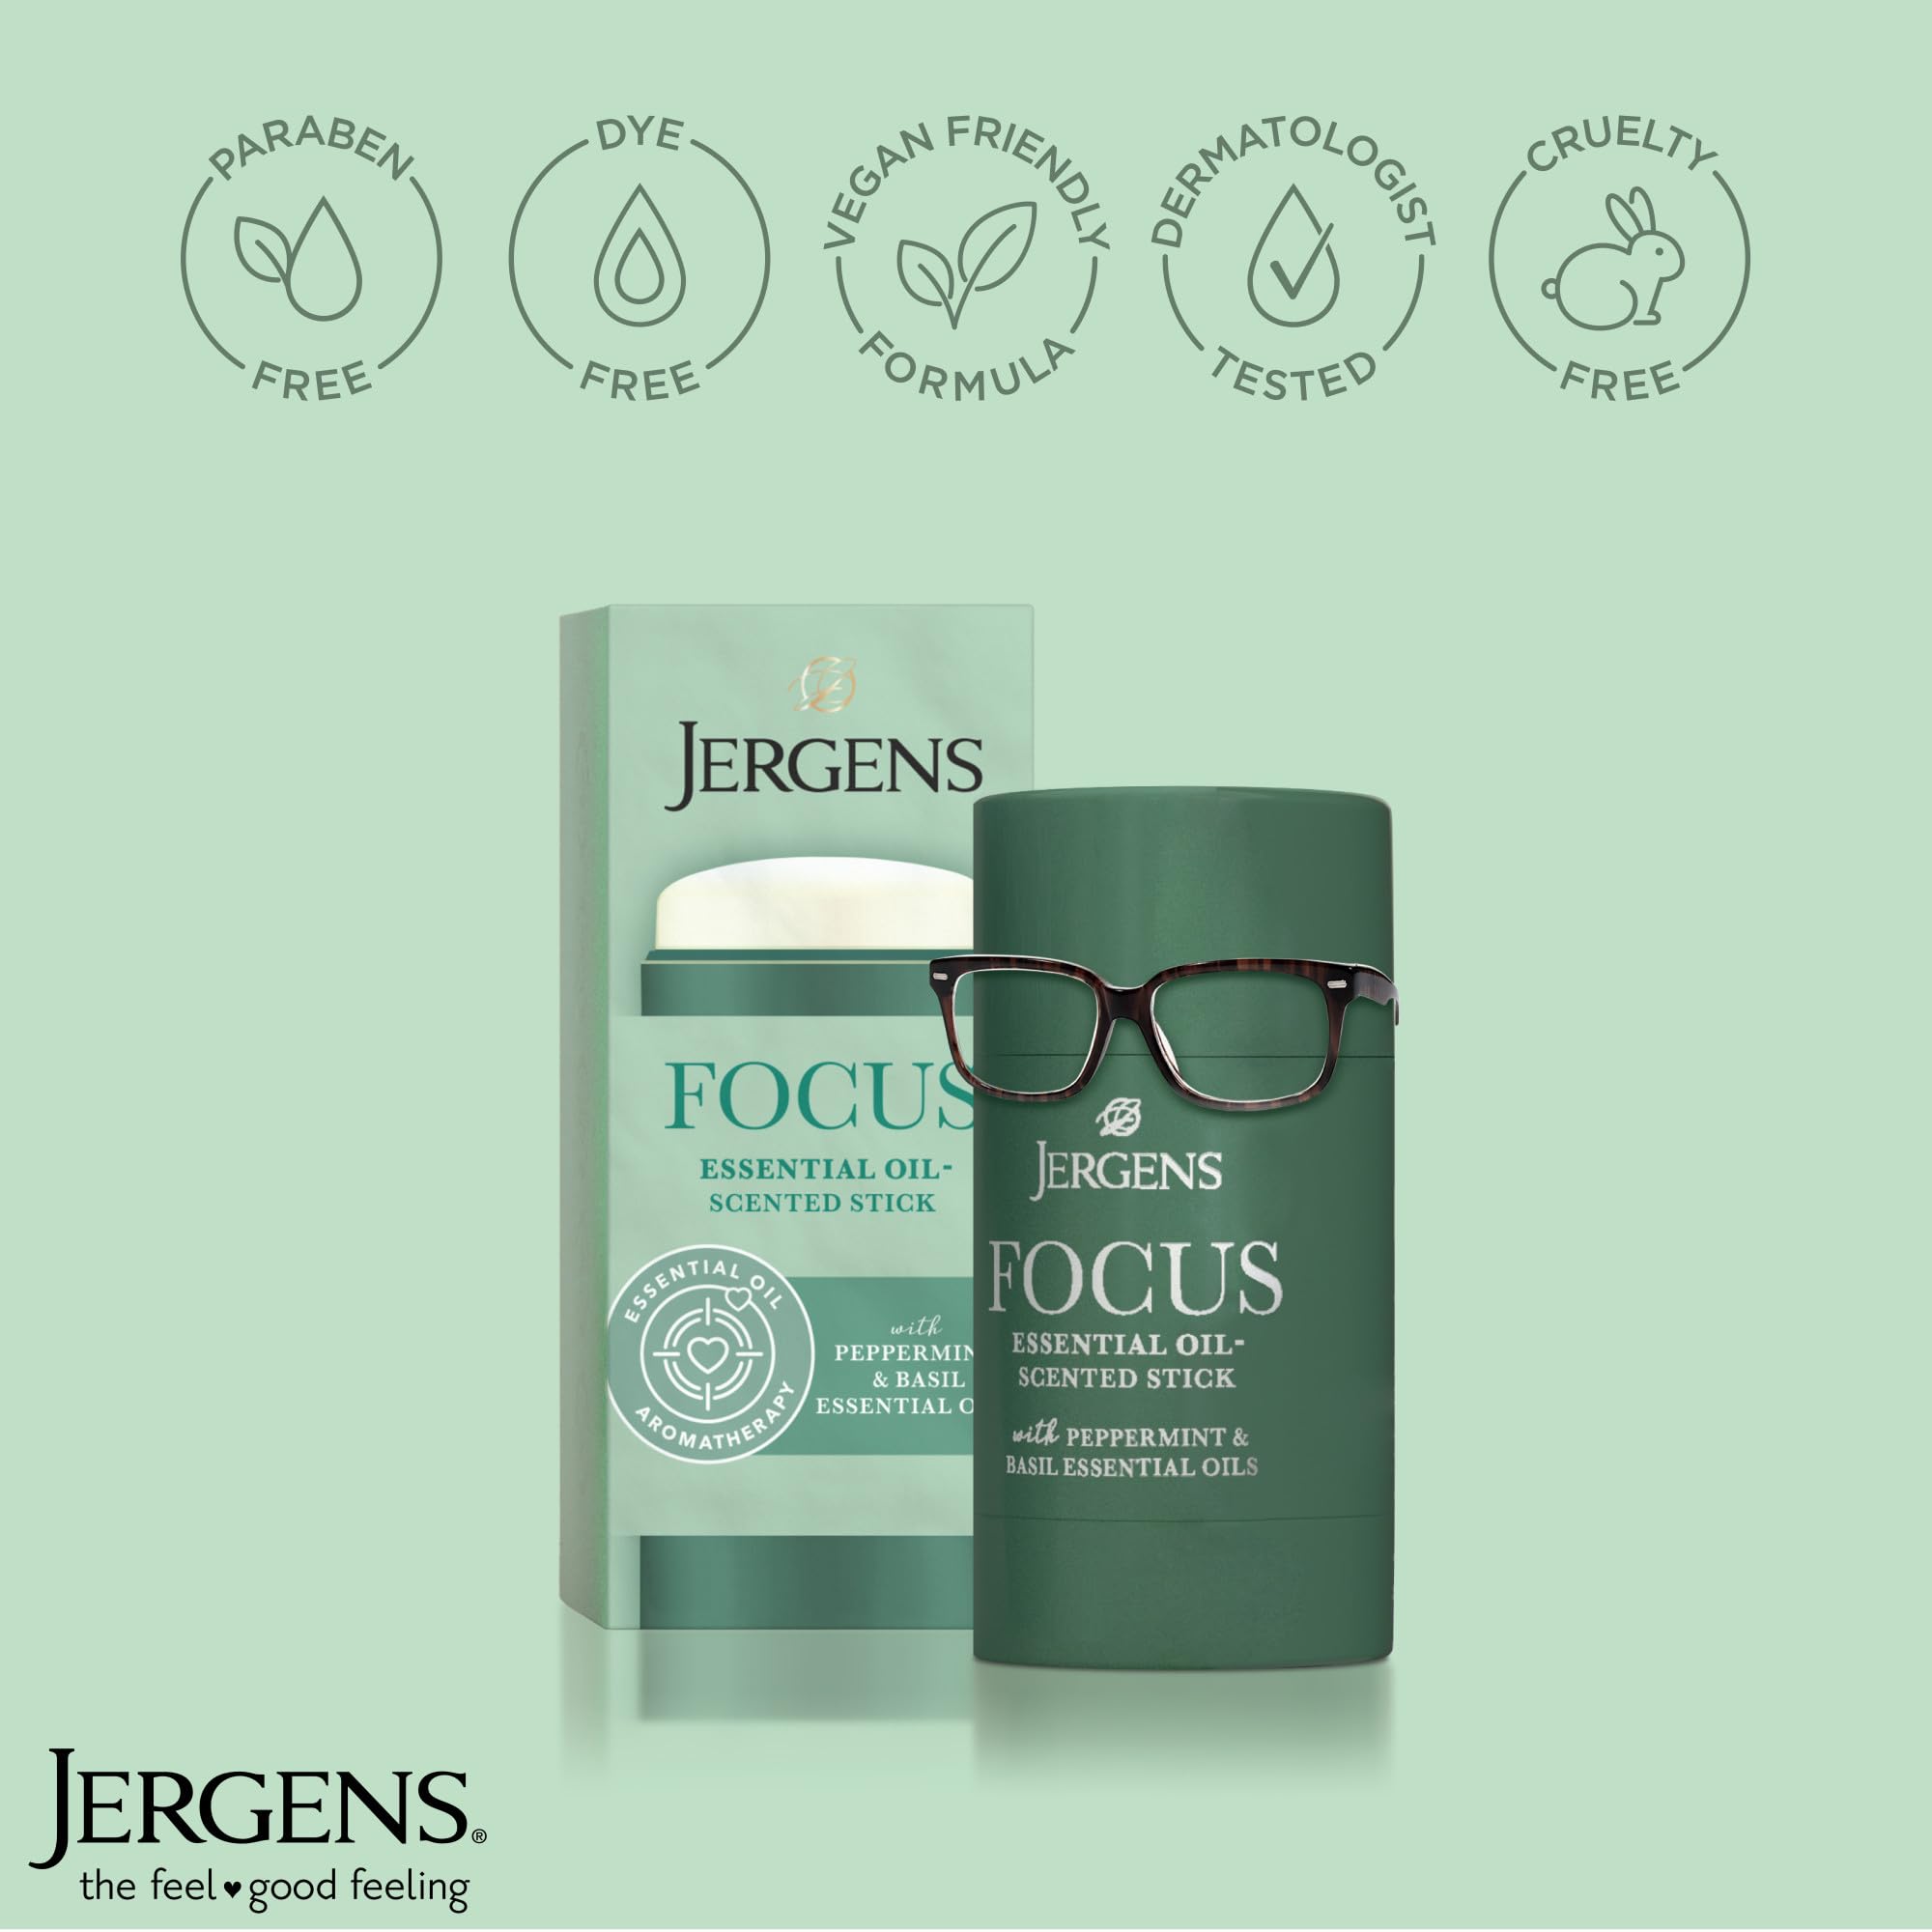 Jergens Focus Essential Oil-Scented Stick, Aromatherapy stick crafted with Peppermint and Basil Essential Oils, 0.9 Oz